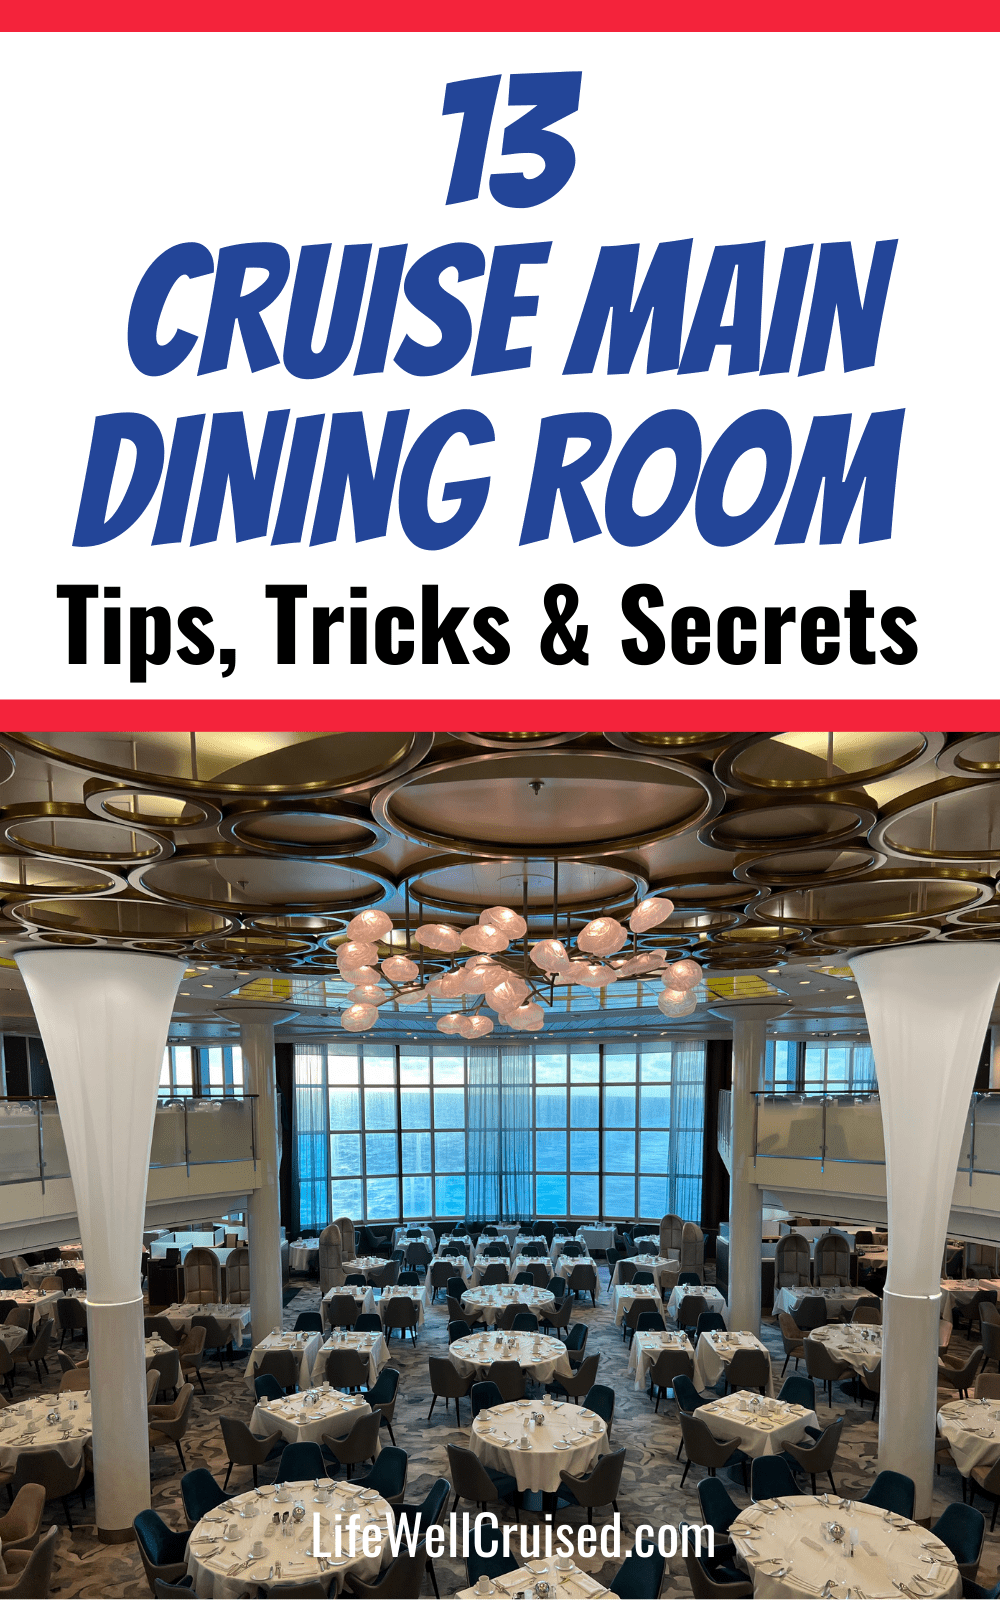 13 Cruise Main Dining Room Tips